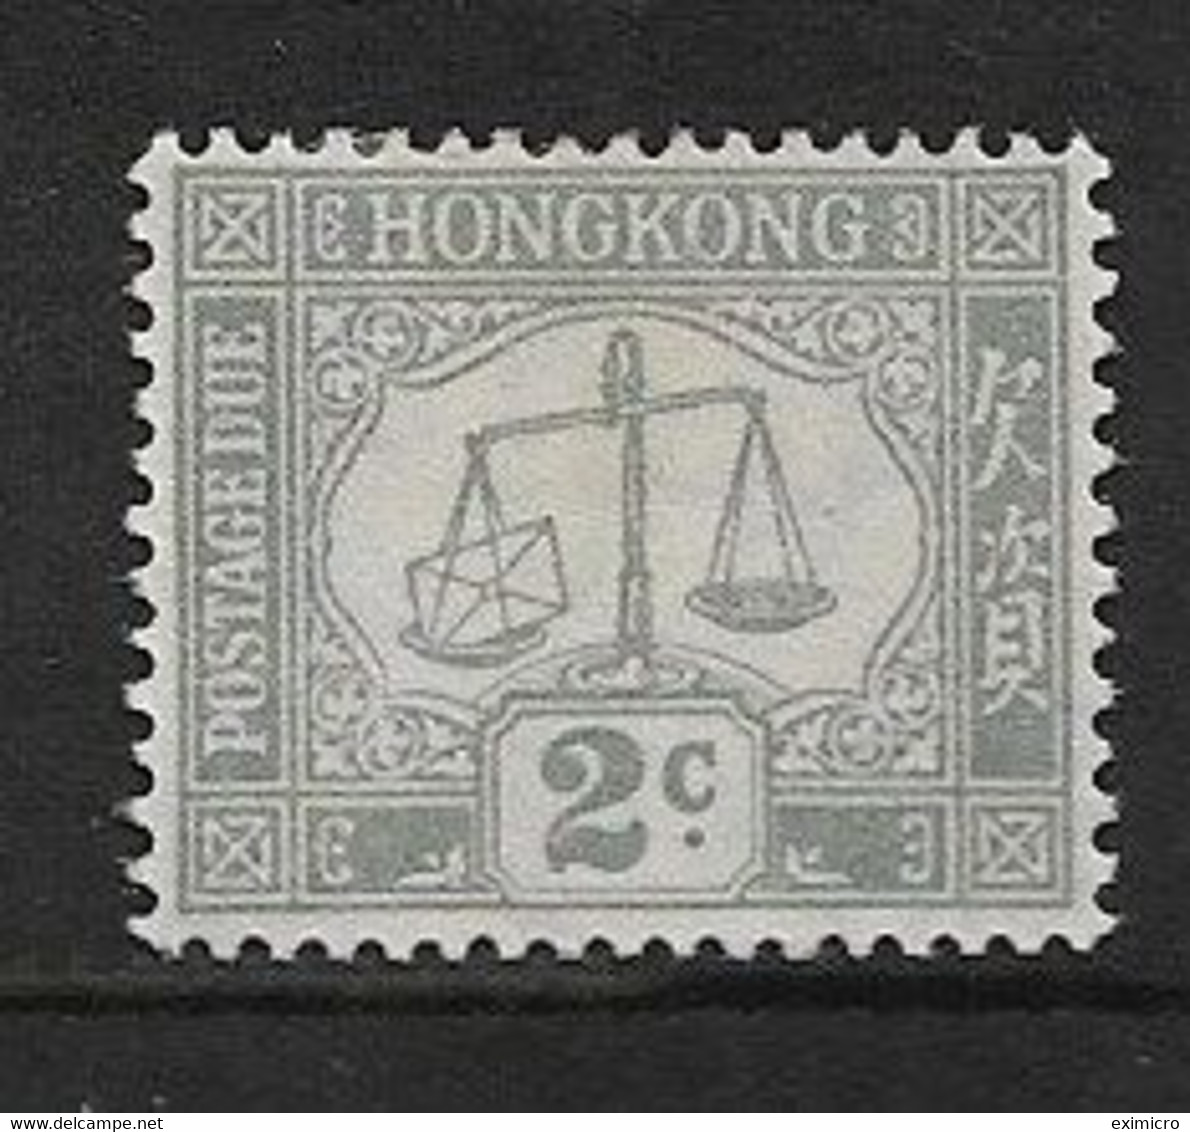 HONG KONG 1938 2c POSTAGE DUE SG D6 MOUNTED MINT Cat £7 - Timbres-taxe